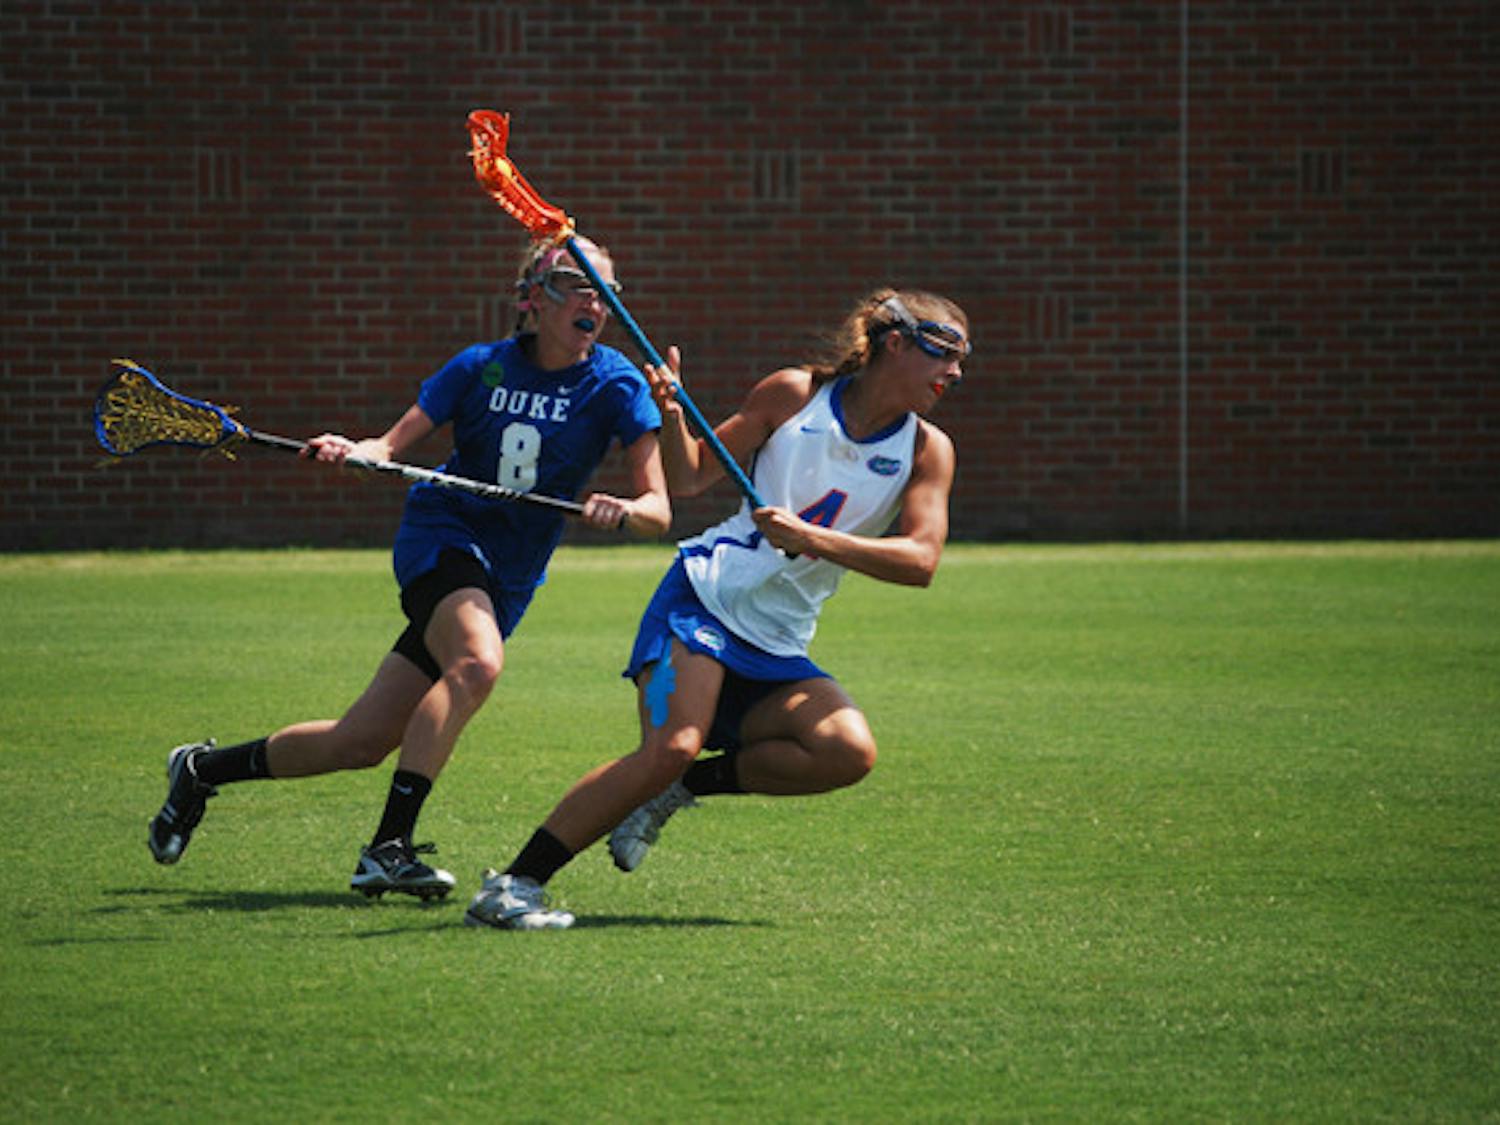 Junior attacker Kitty Cullen returns to the Florida lineup after missing the last two games while recovering from a concussion